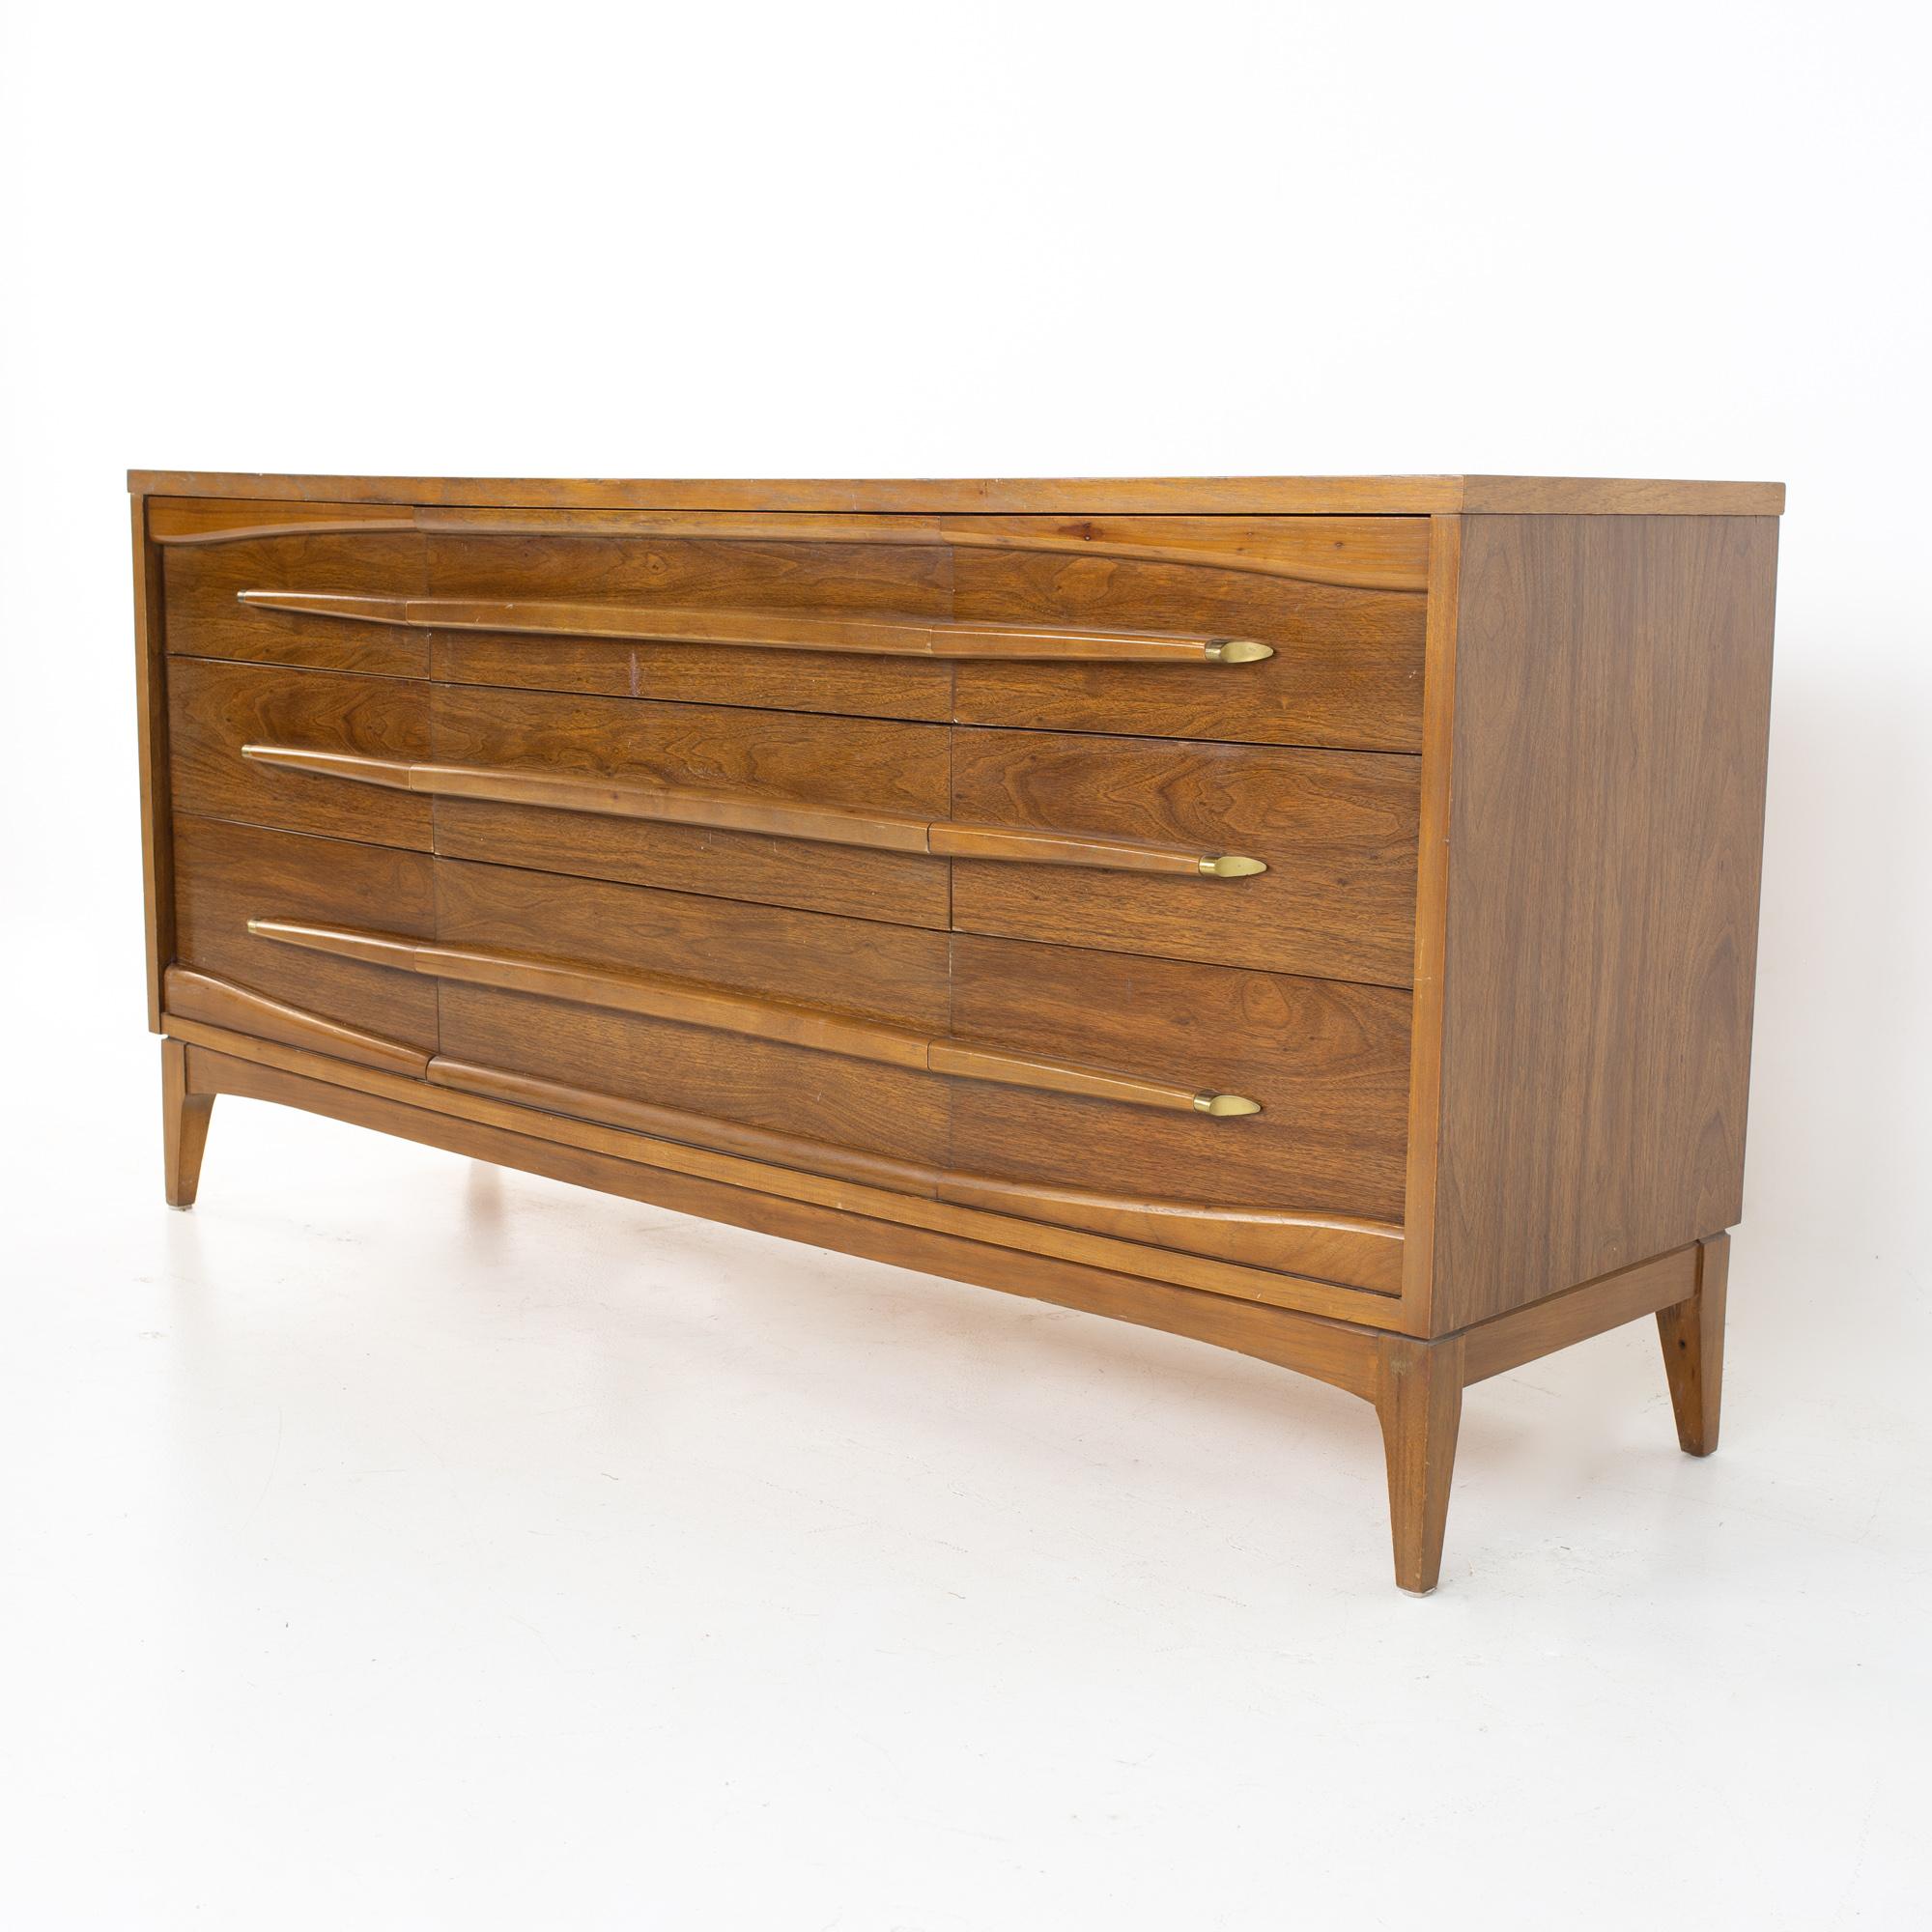 Kroehler Furniture mid century walnut and brass 9 drawer lowboy dresser
Dresser measures: 64.25 wide x 18.25 deep x 31.25 inches high 

All pieces of furniture can be had in what we call restored vintage condition. That means the piece is